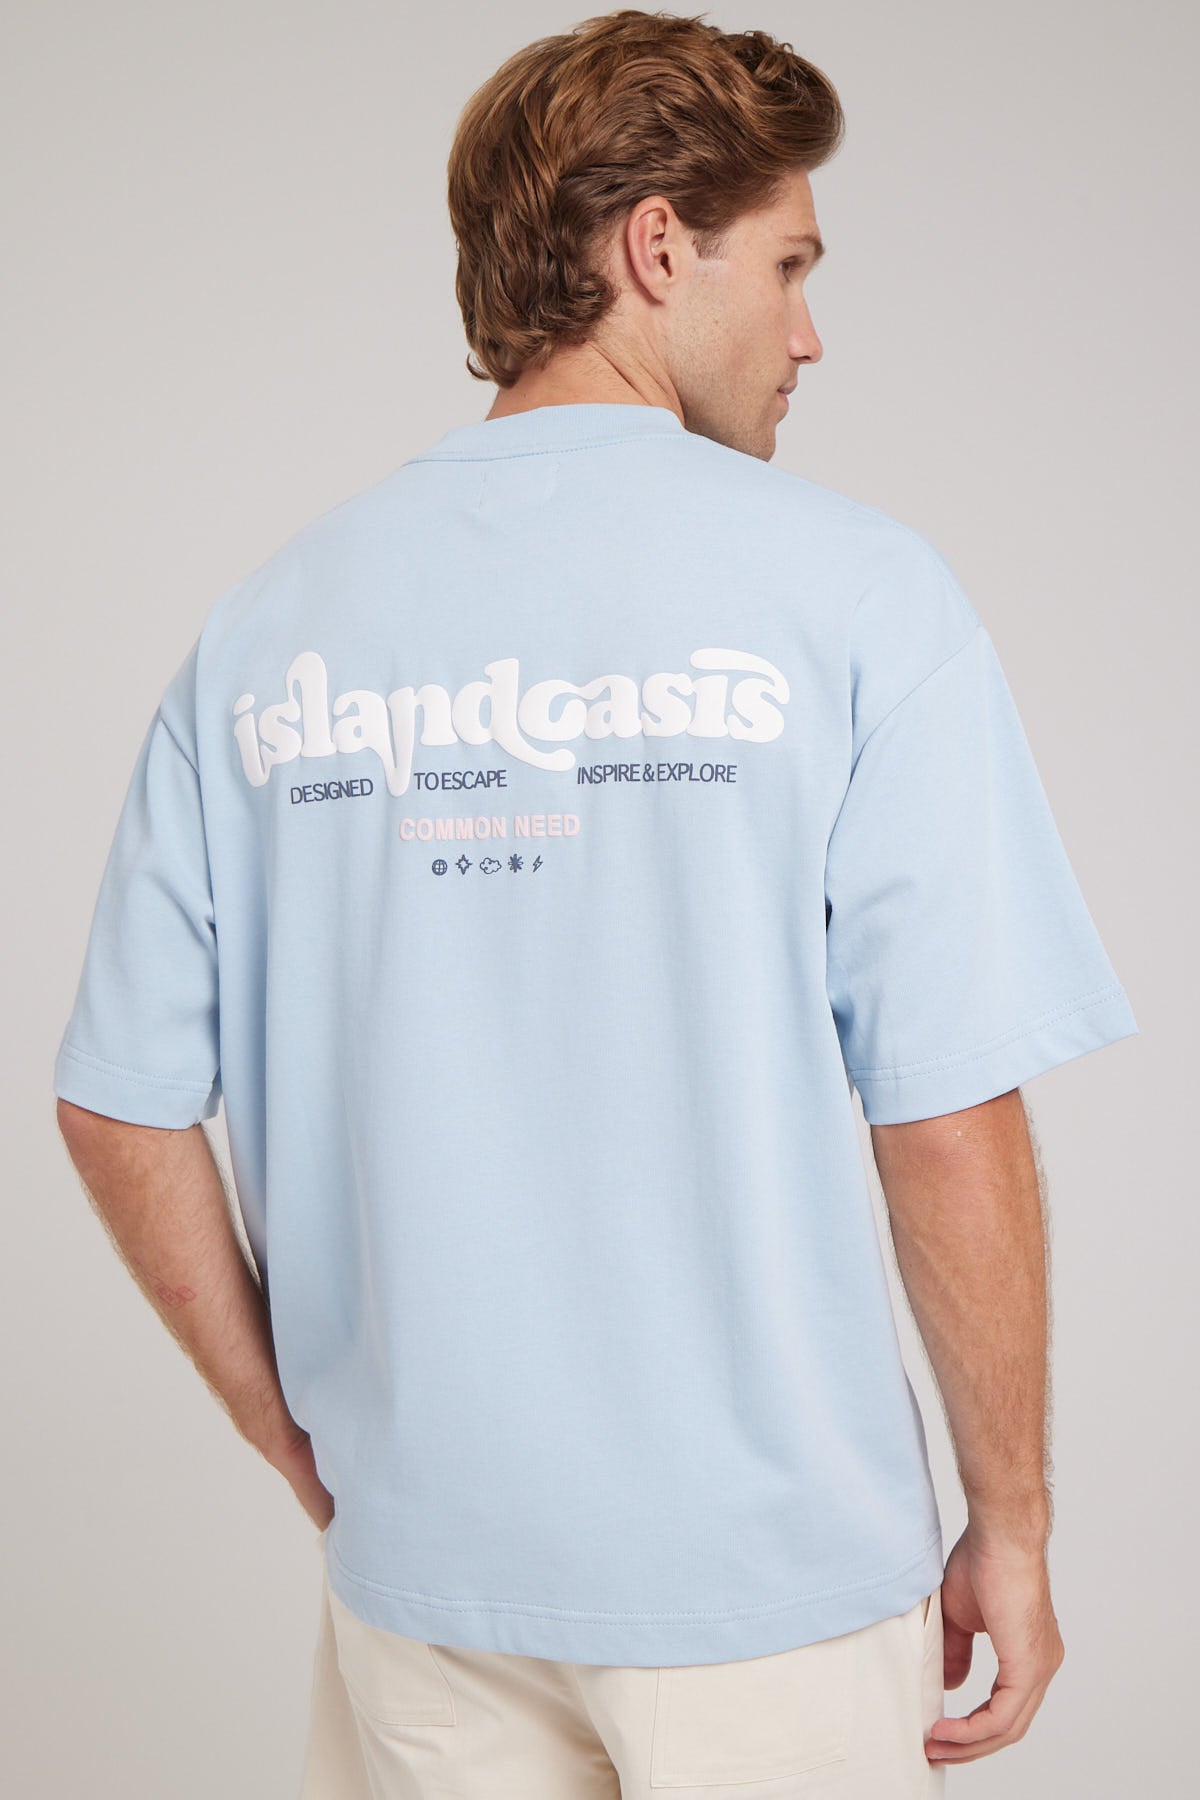 Common Need Oasis Easy Tee Blue – Universal Store